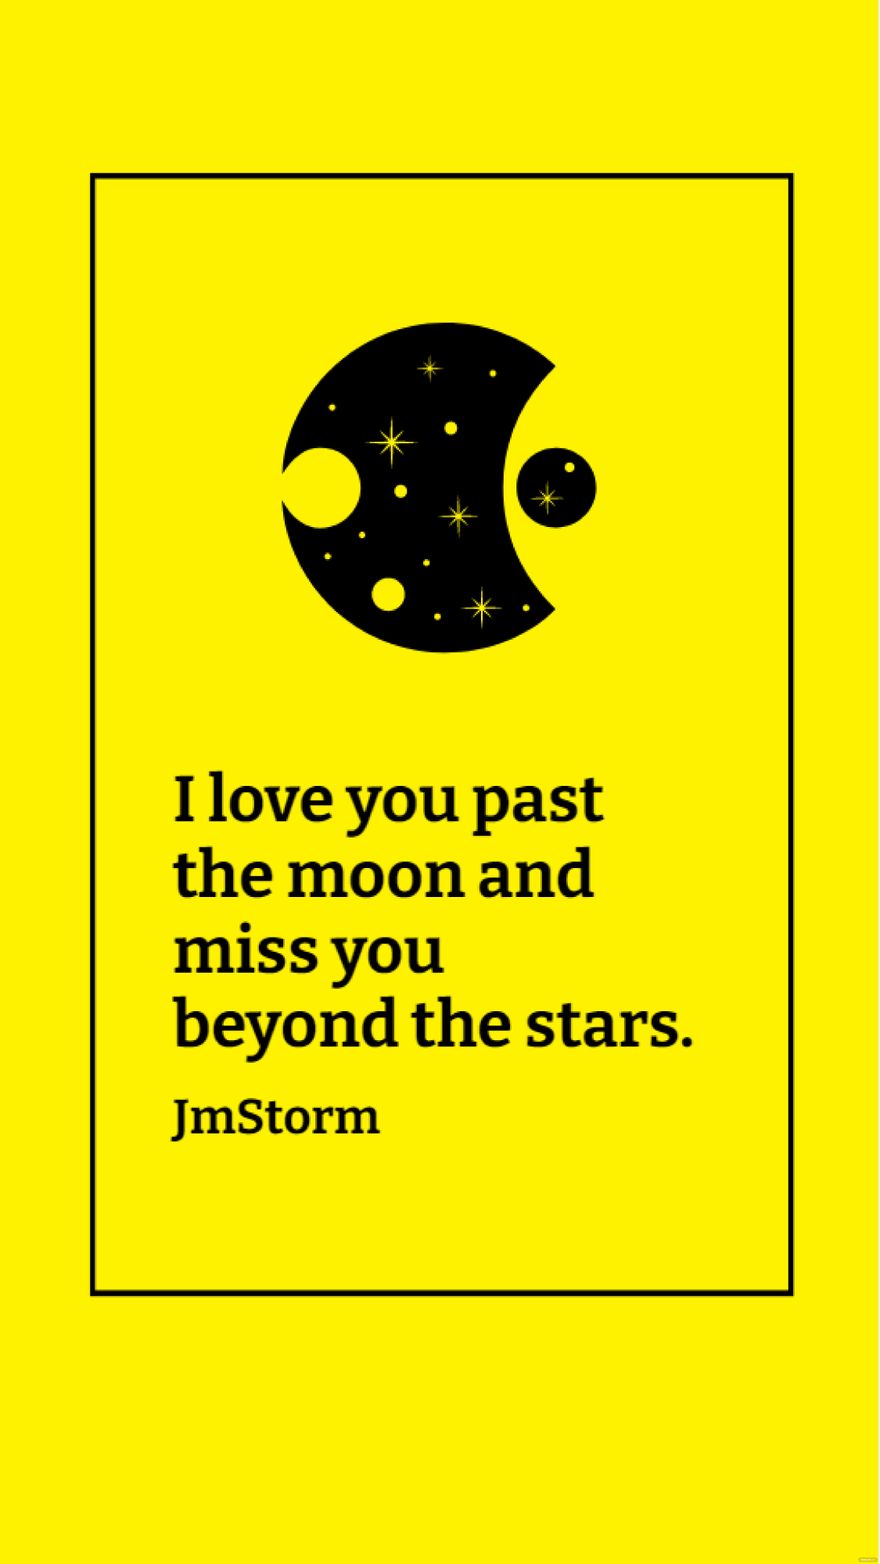 Free JmStorm - I love you past the moon and miss you beyond the stars.